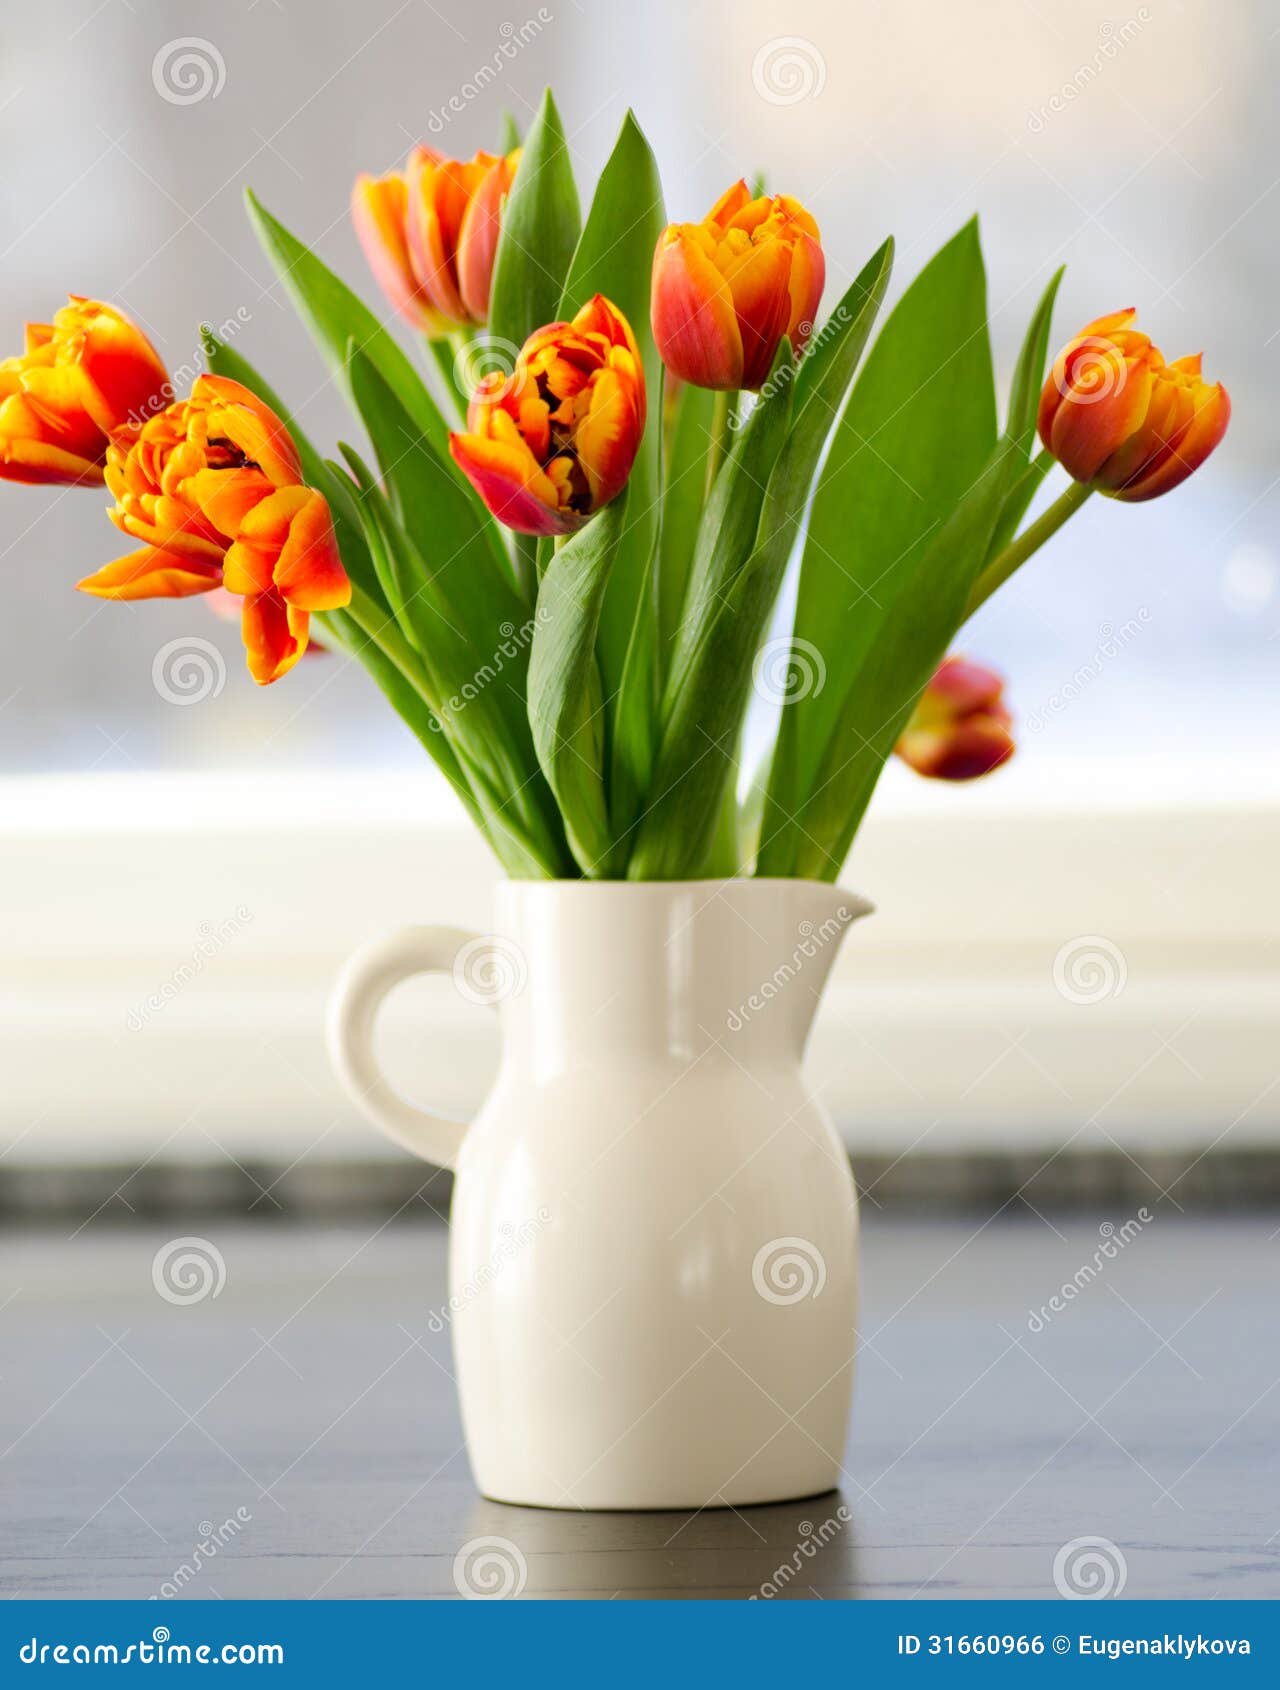 Tulips in jug on the table stock photo. Image of floral - 31660966